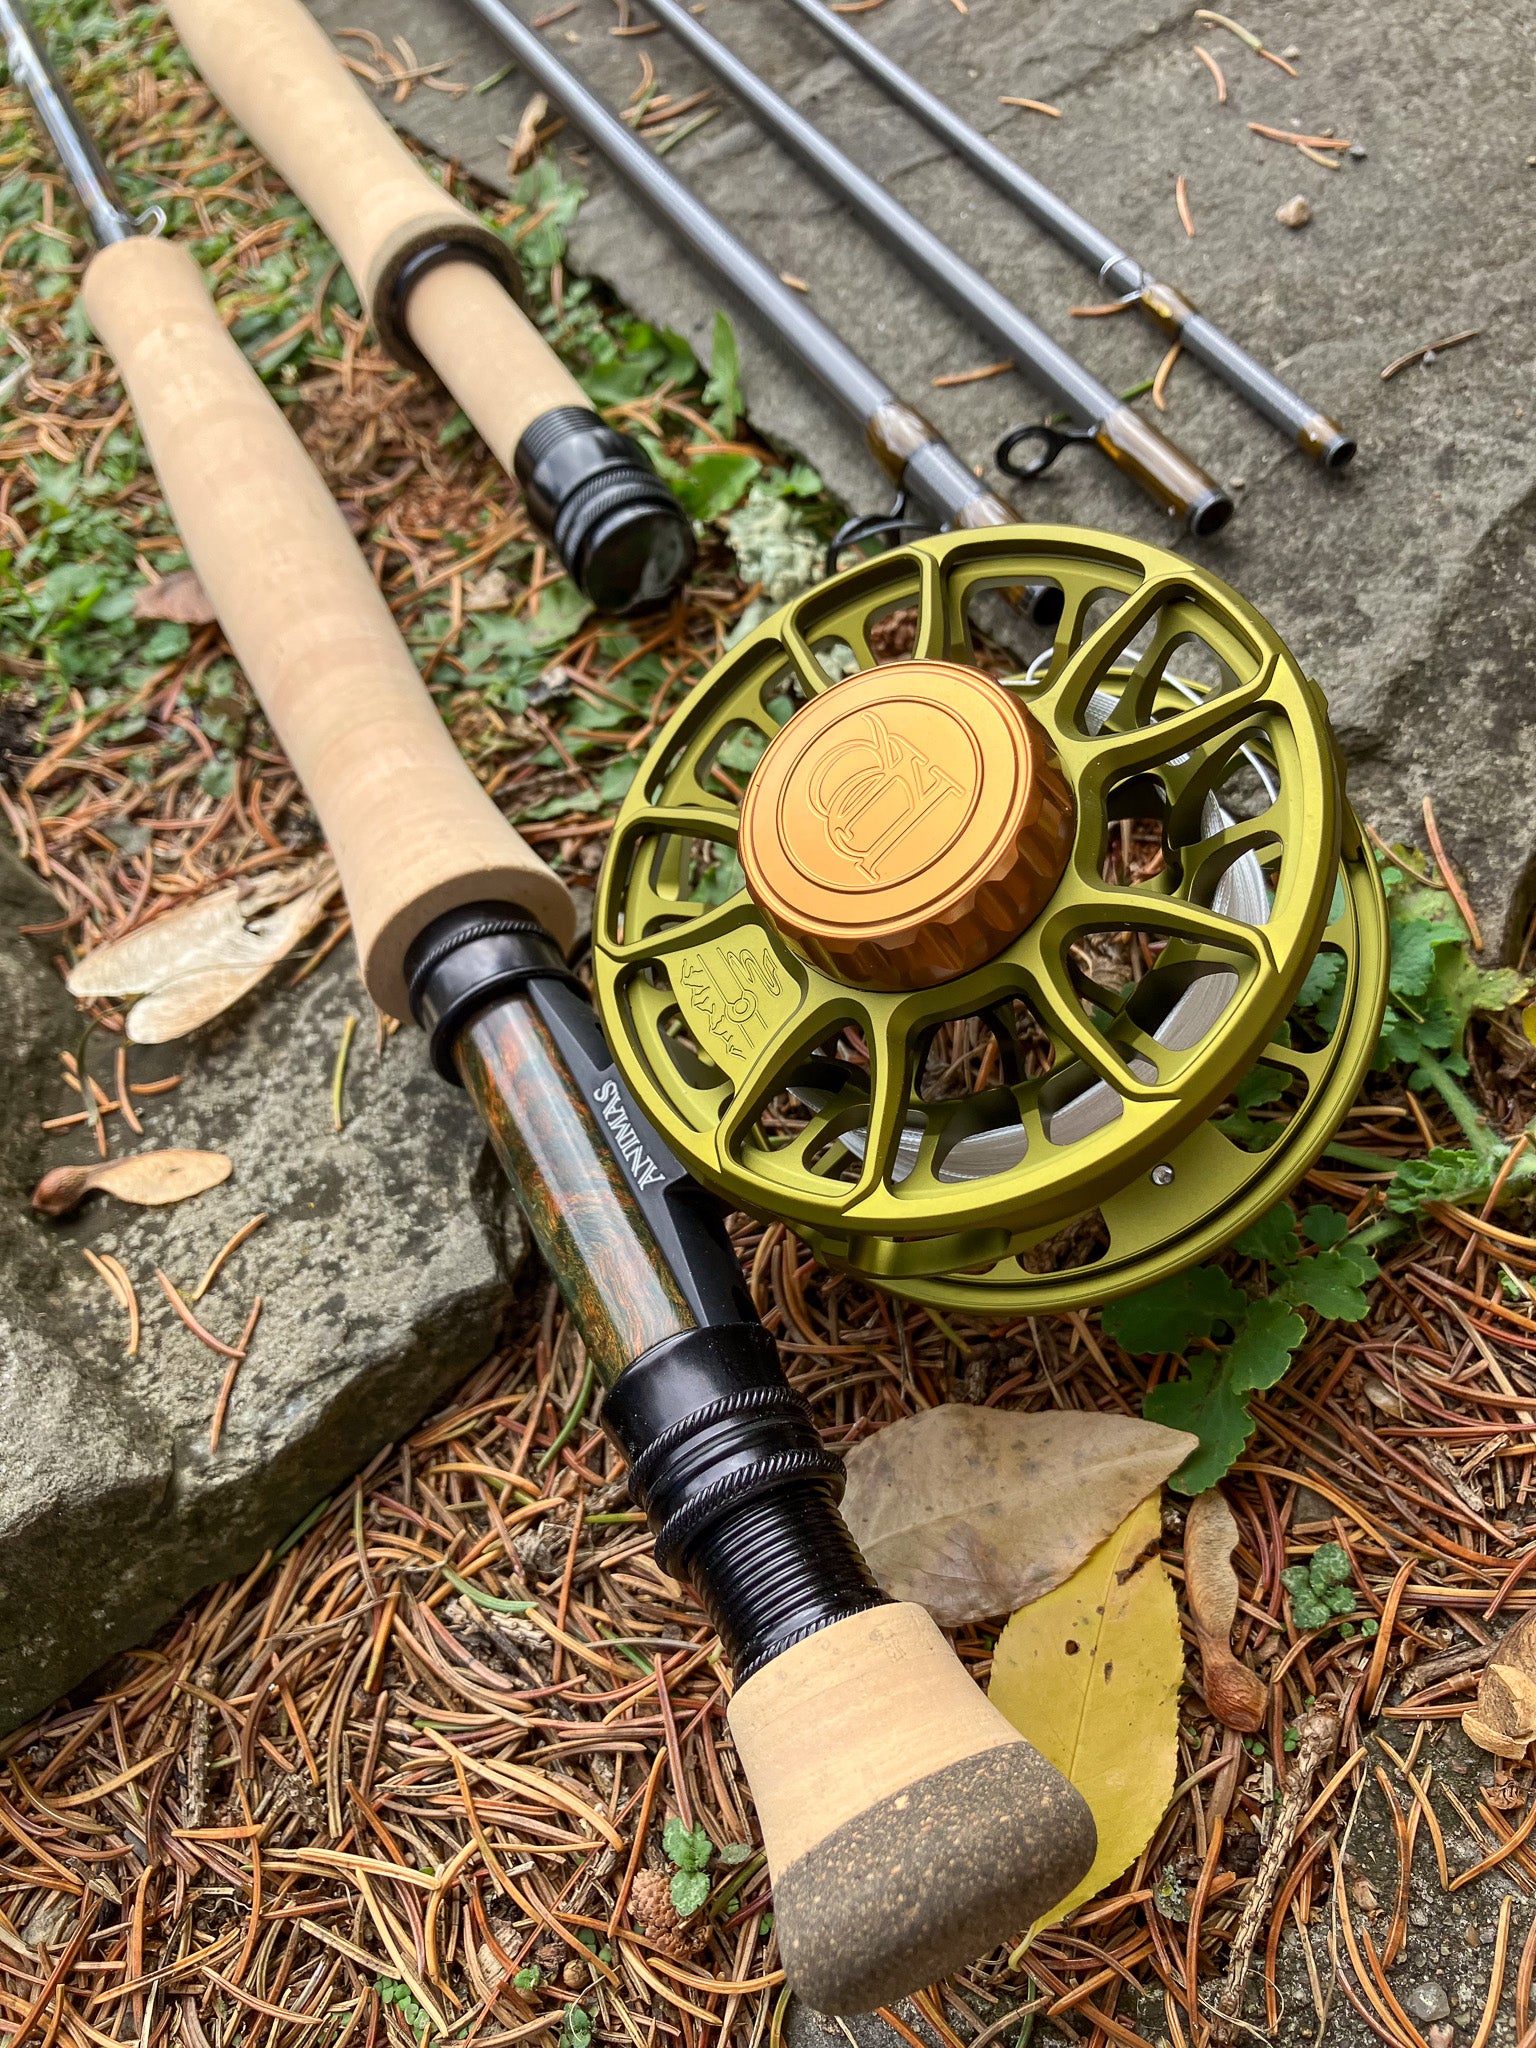 Peacemaker 10'6 4 wt. 4 pc. & 8'0 3-4 wt. 3 pc. 2 rods in one. Choos – JP  Ross Fly Rods & Co. Outdoors